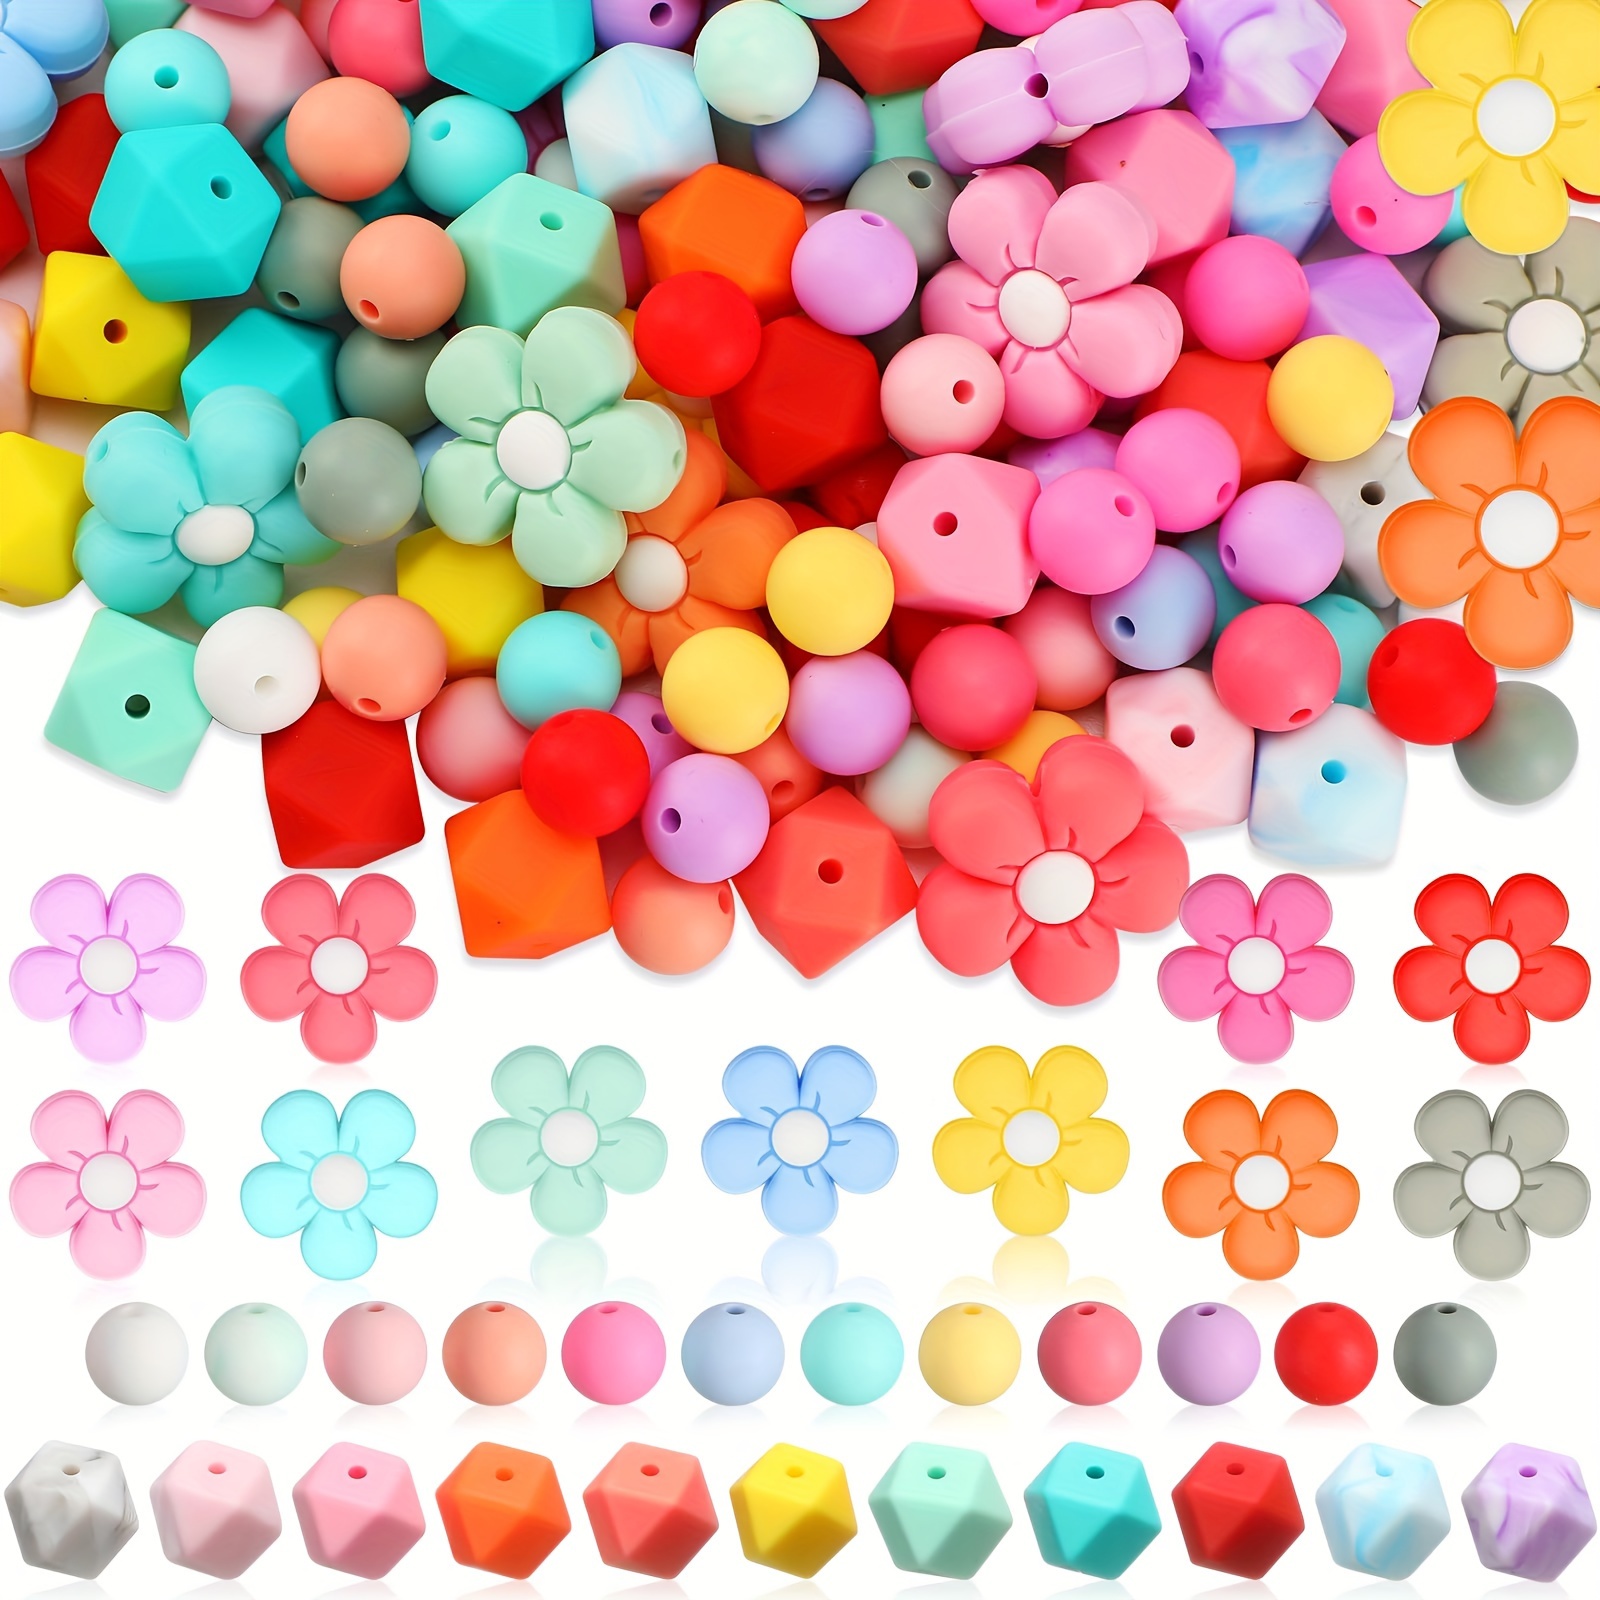 

105pcs Colorful Flower Silicone Beads Bulk Set Include 12mm Round, 14mm Hexagon, 26mm Flower Shape For Diy Key Bag Chain Bracelet Necklace Craft Supplies